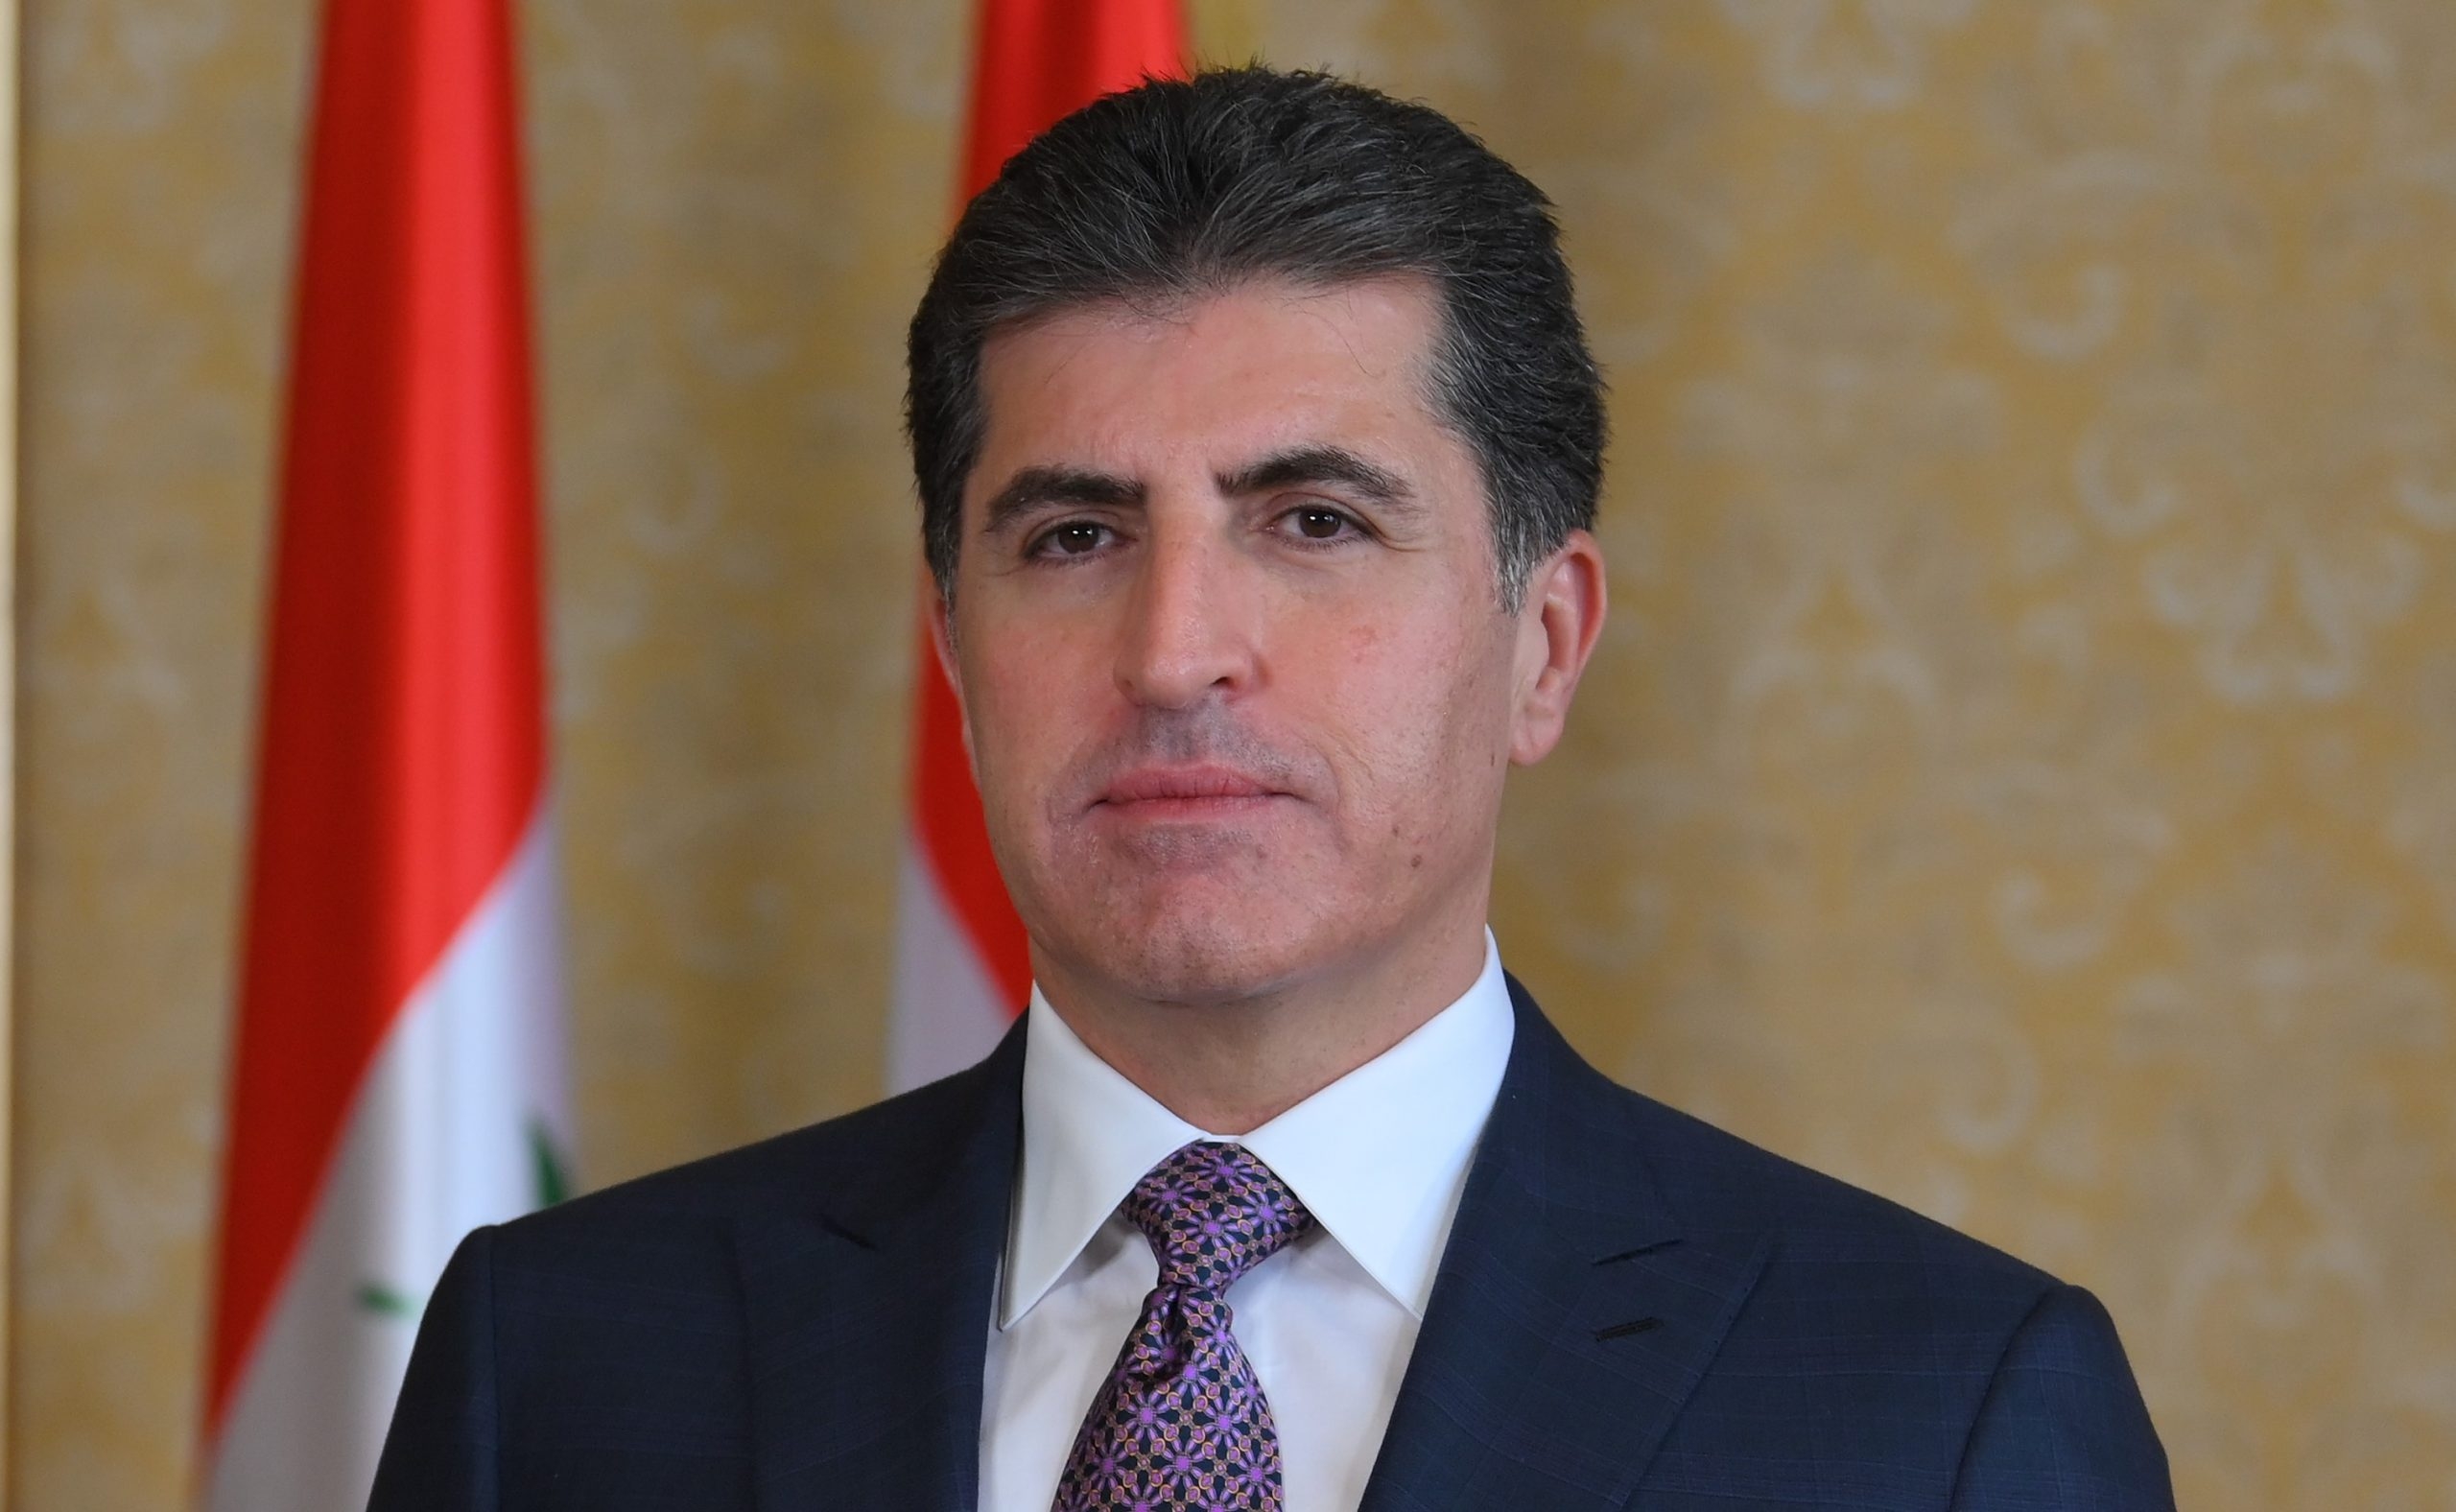 A statement from the President of the Kurdistan Region on political and security developments in Baghdad